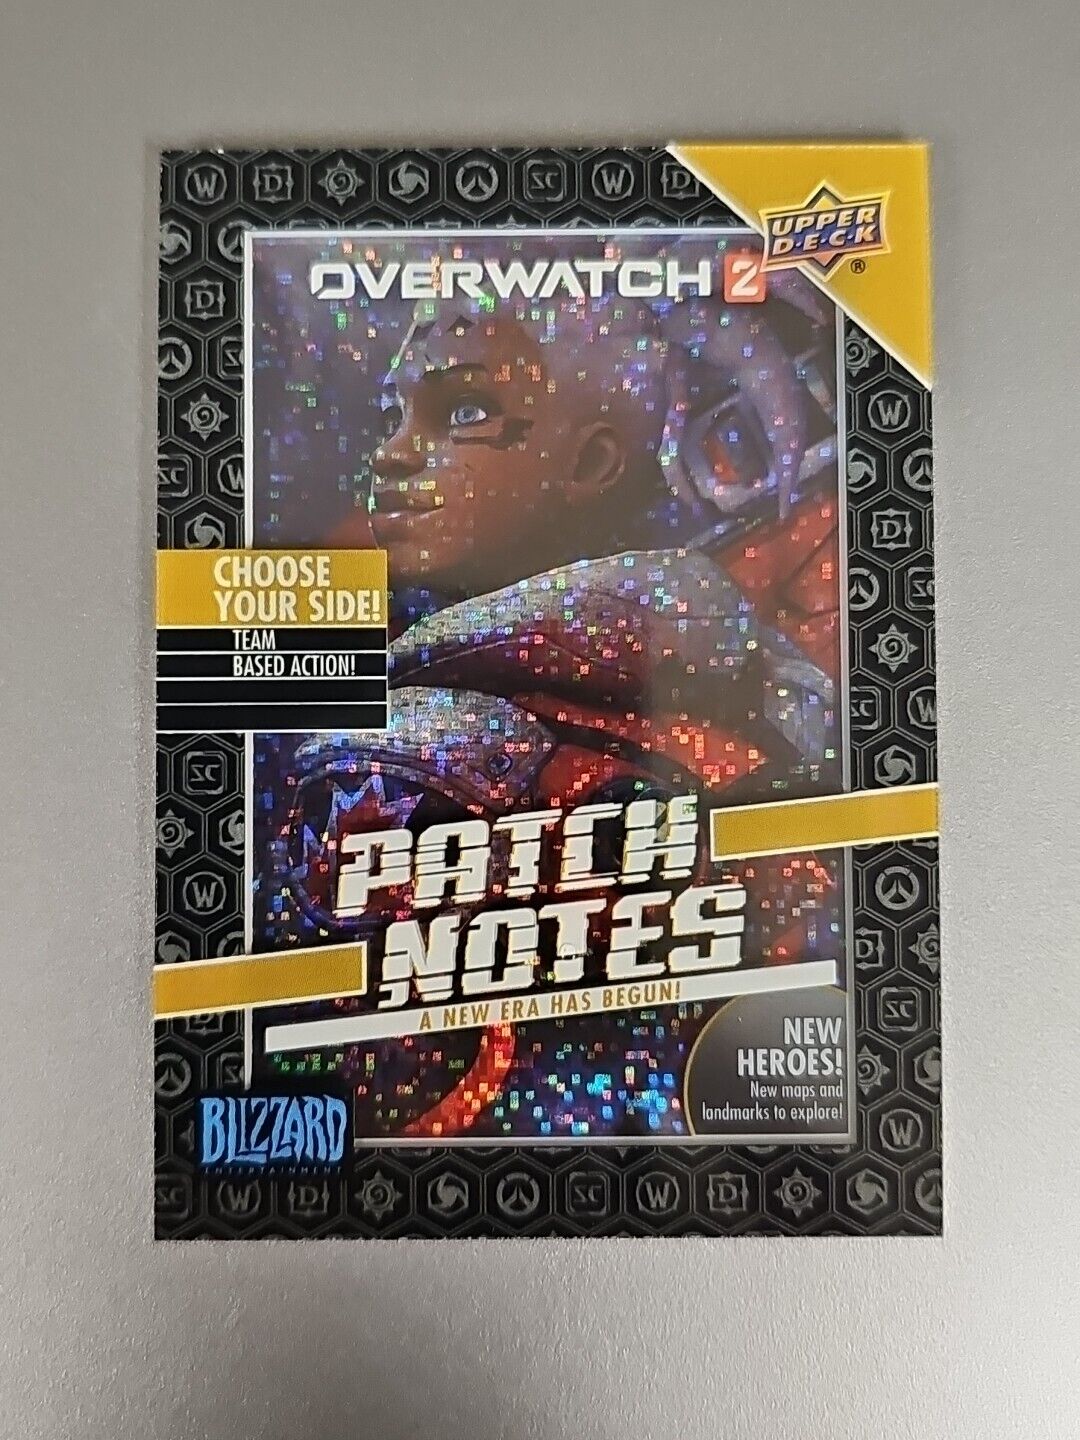 2023 Upper Deck Blizzard Legacy OVERWATCH 2 PATCH NOTES VERSION 2 PN-15 1:72000